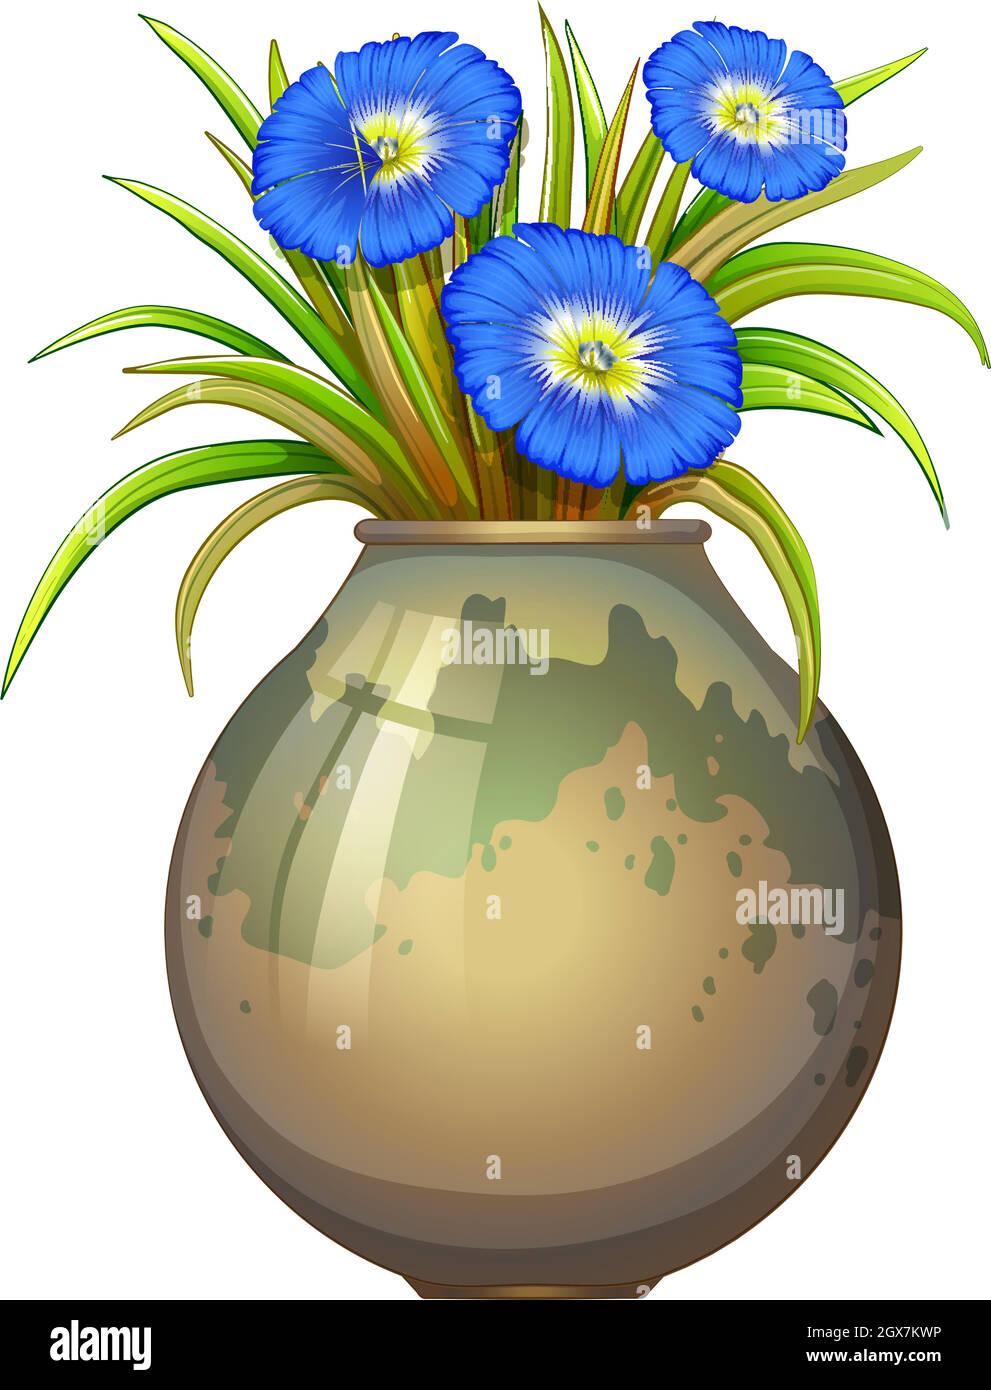 A pot with blue flowers Stock Vector